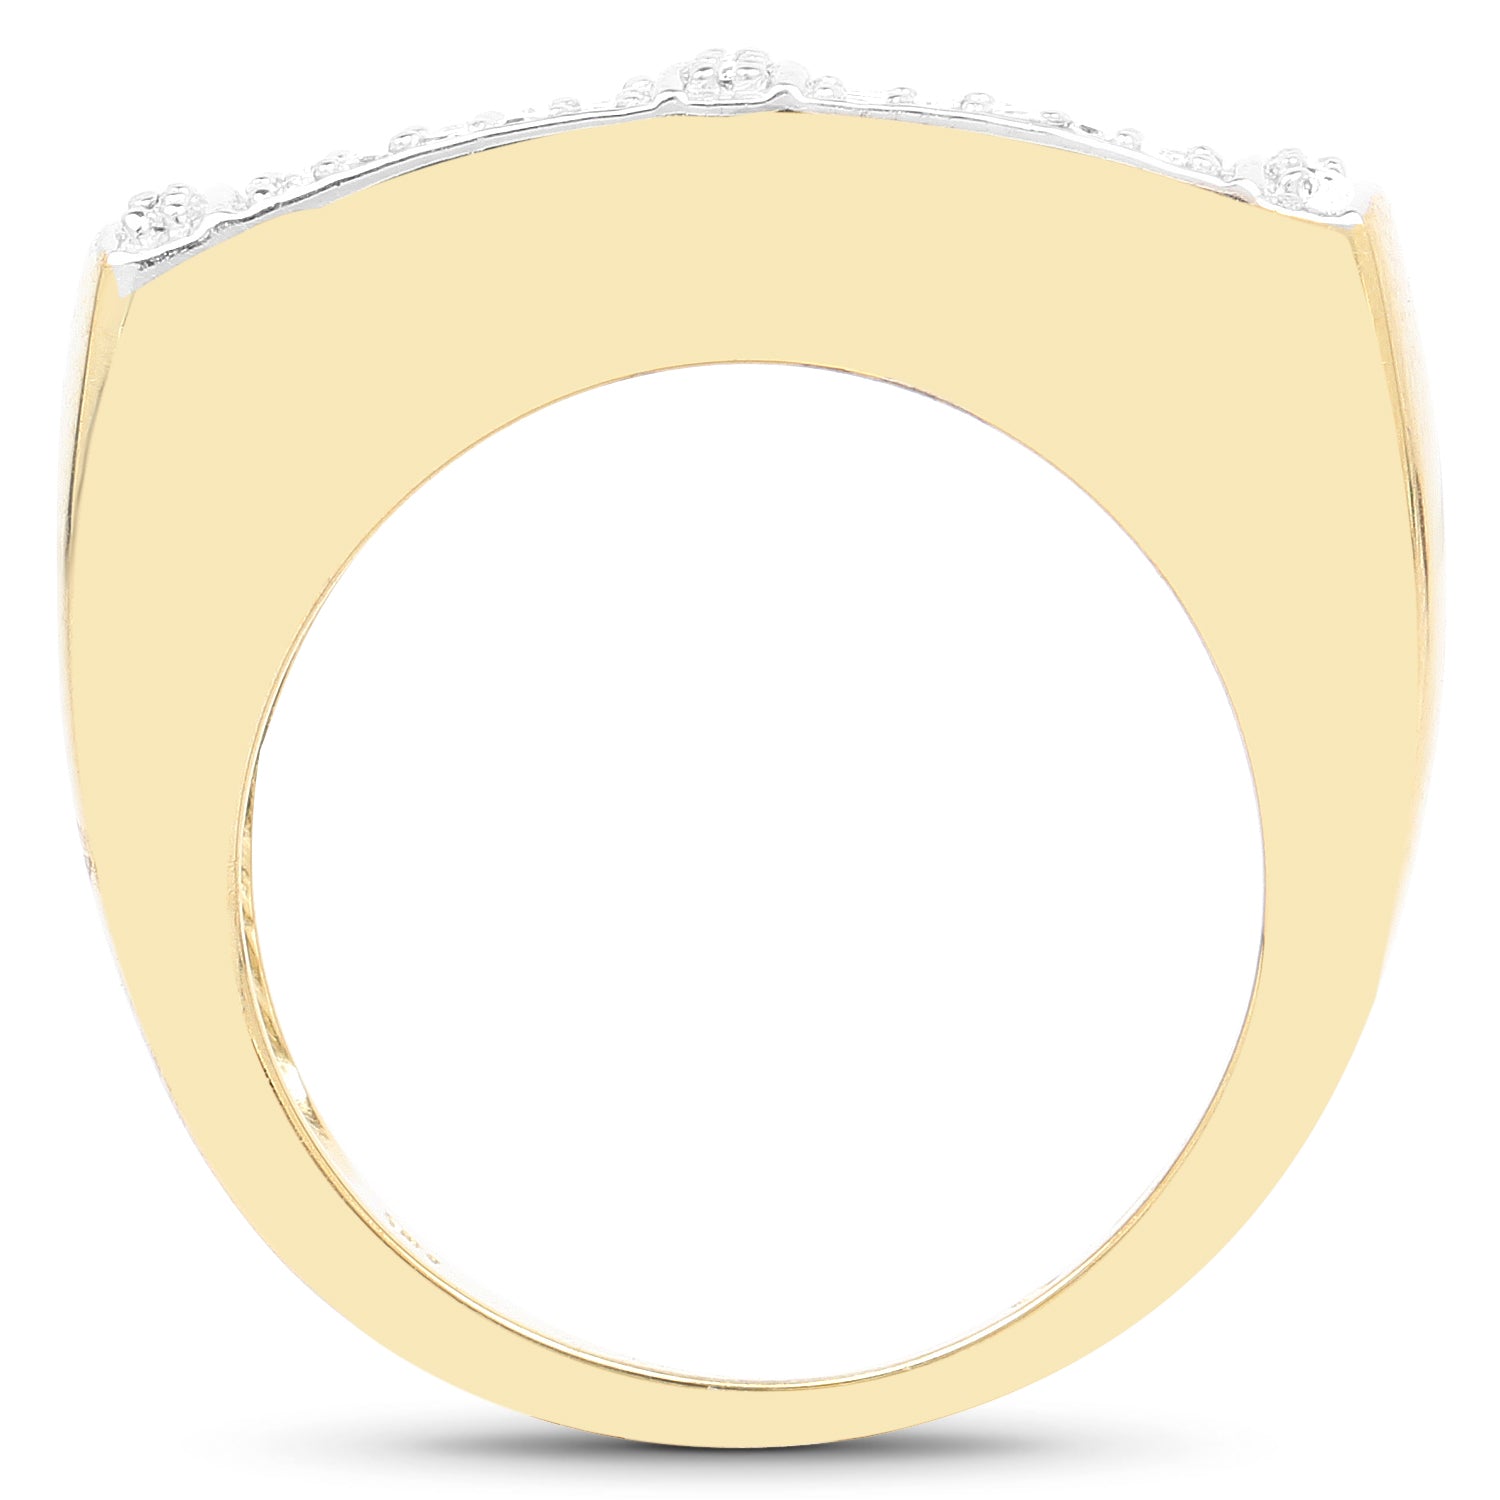 White Diamond Cocktail Ring in 14K Yellow Gold Plated .925 Sterling Silver - 0.25 Carat Genuine Stone - Jewelry & Watches - Bijou Her -  -  - 